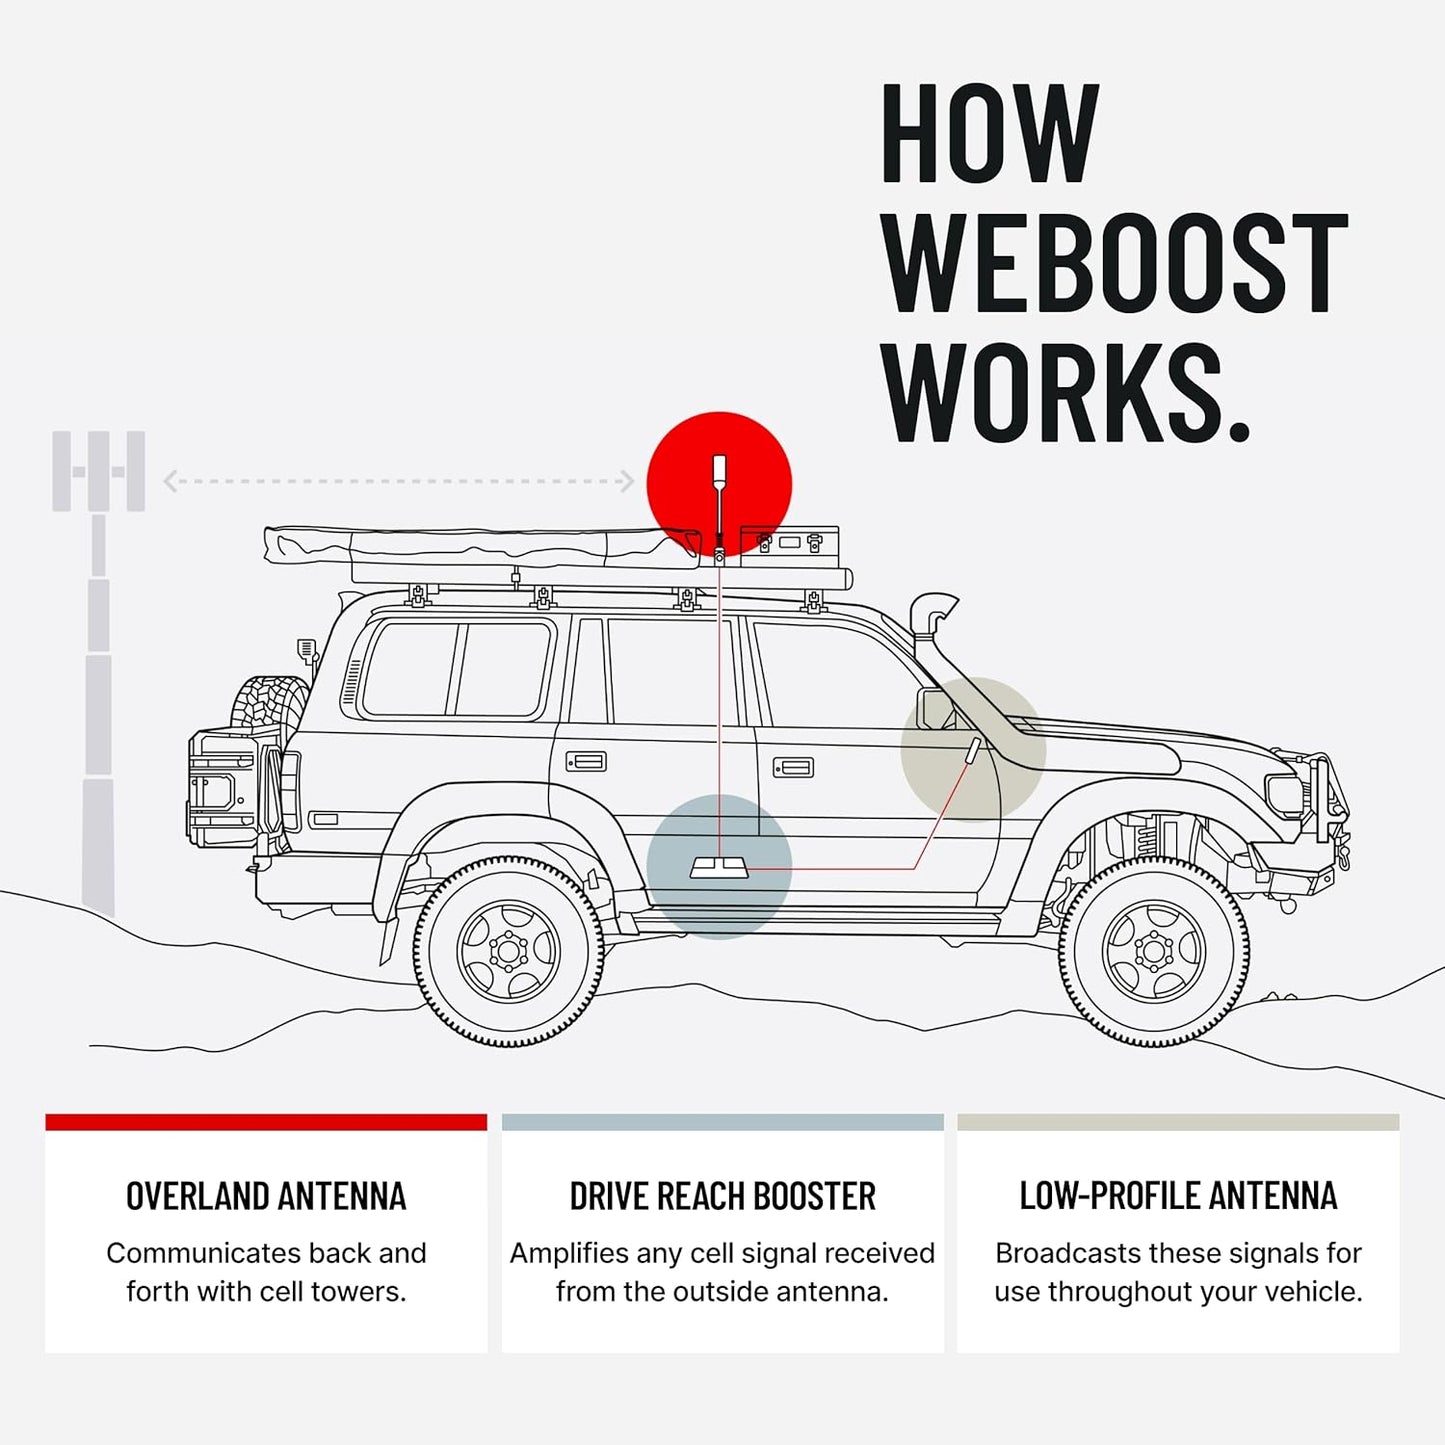 DRIVE REACH OVERLAND by weboost